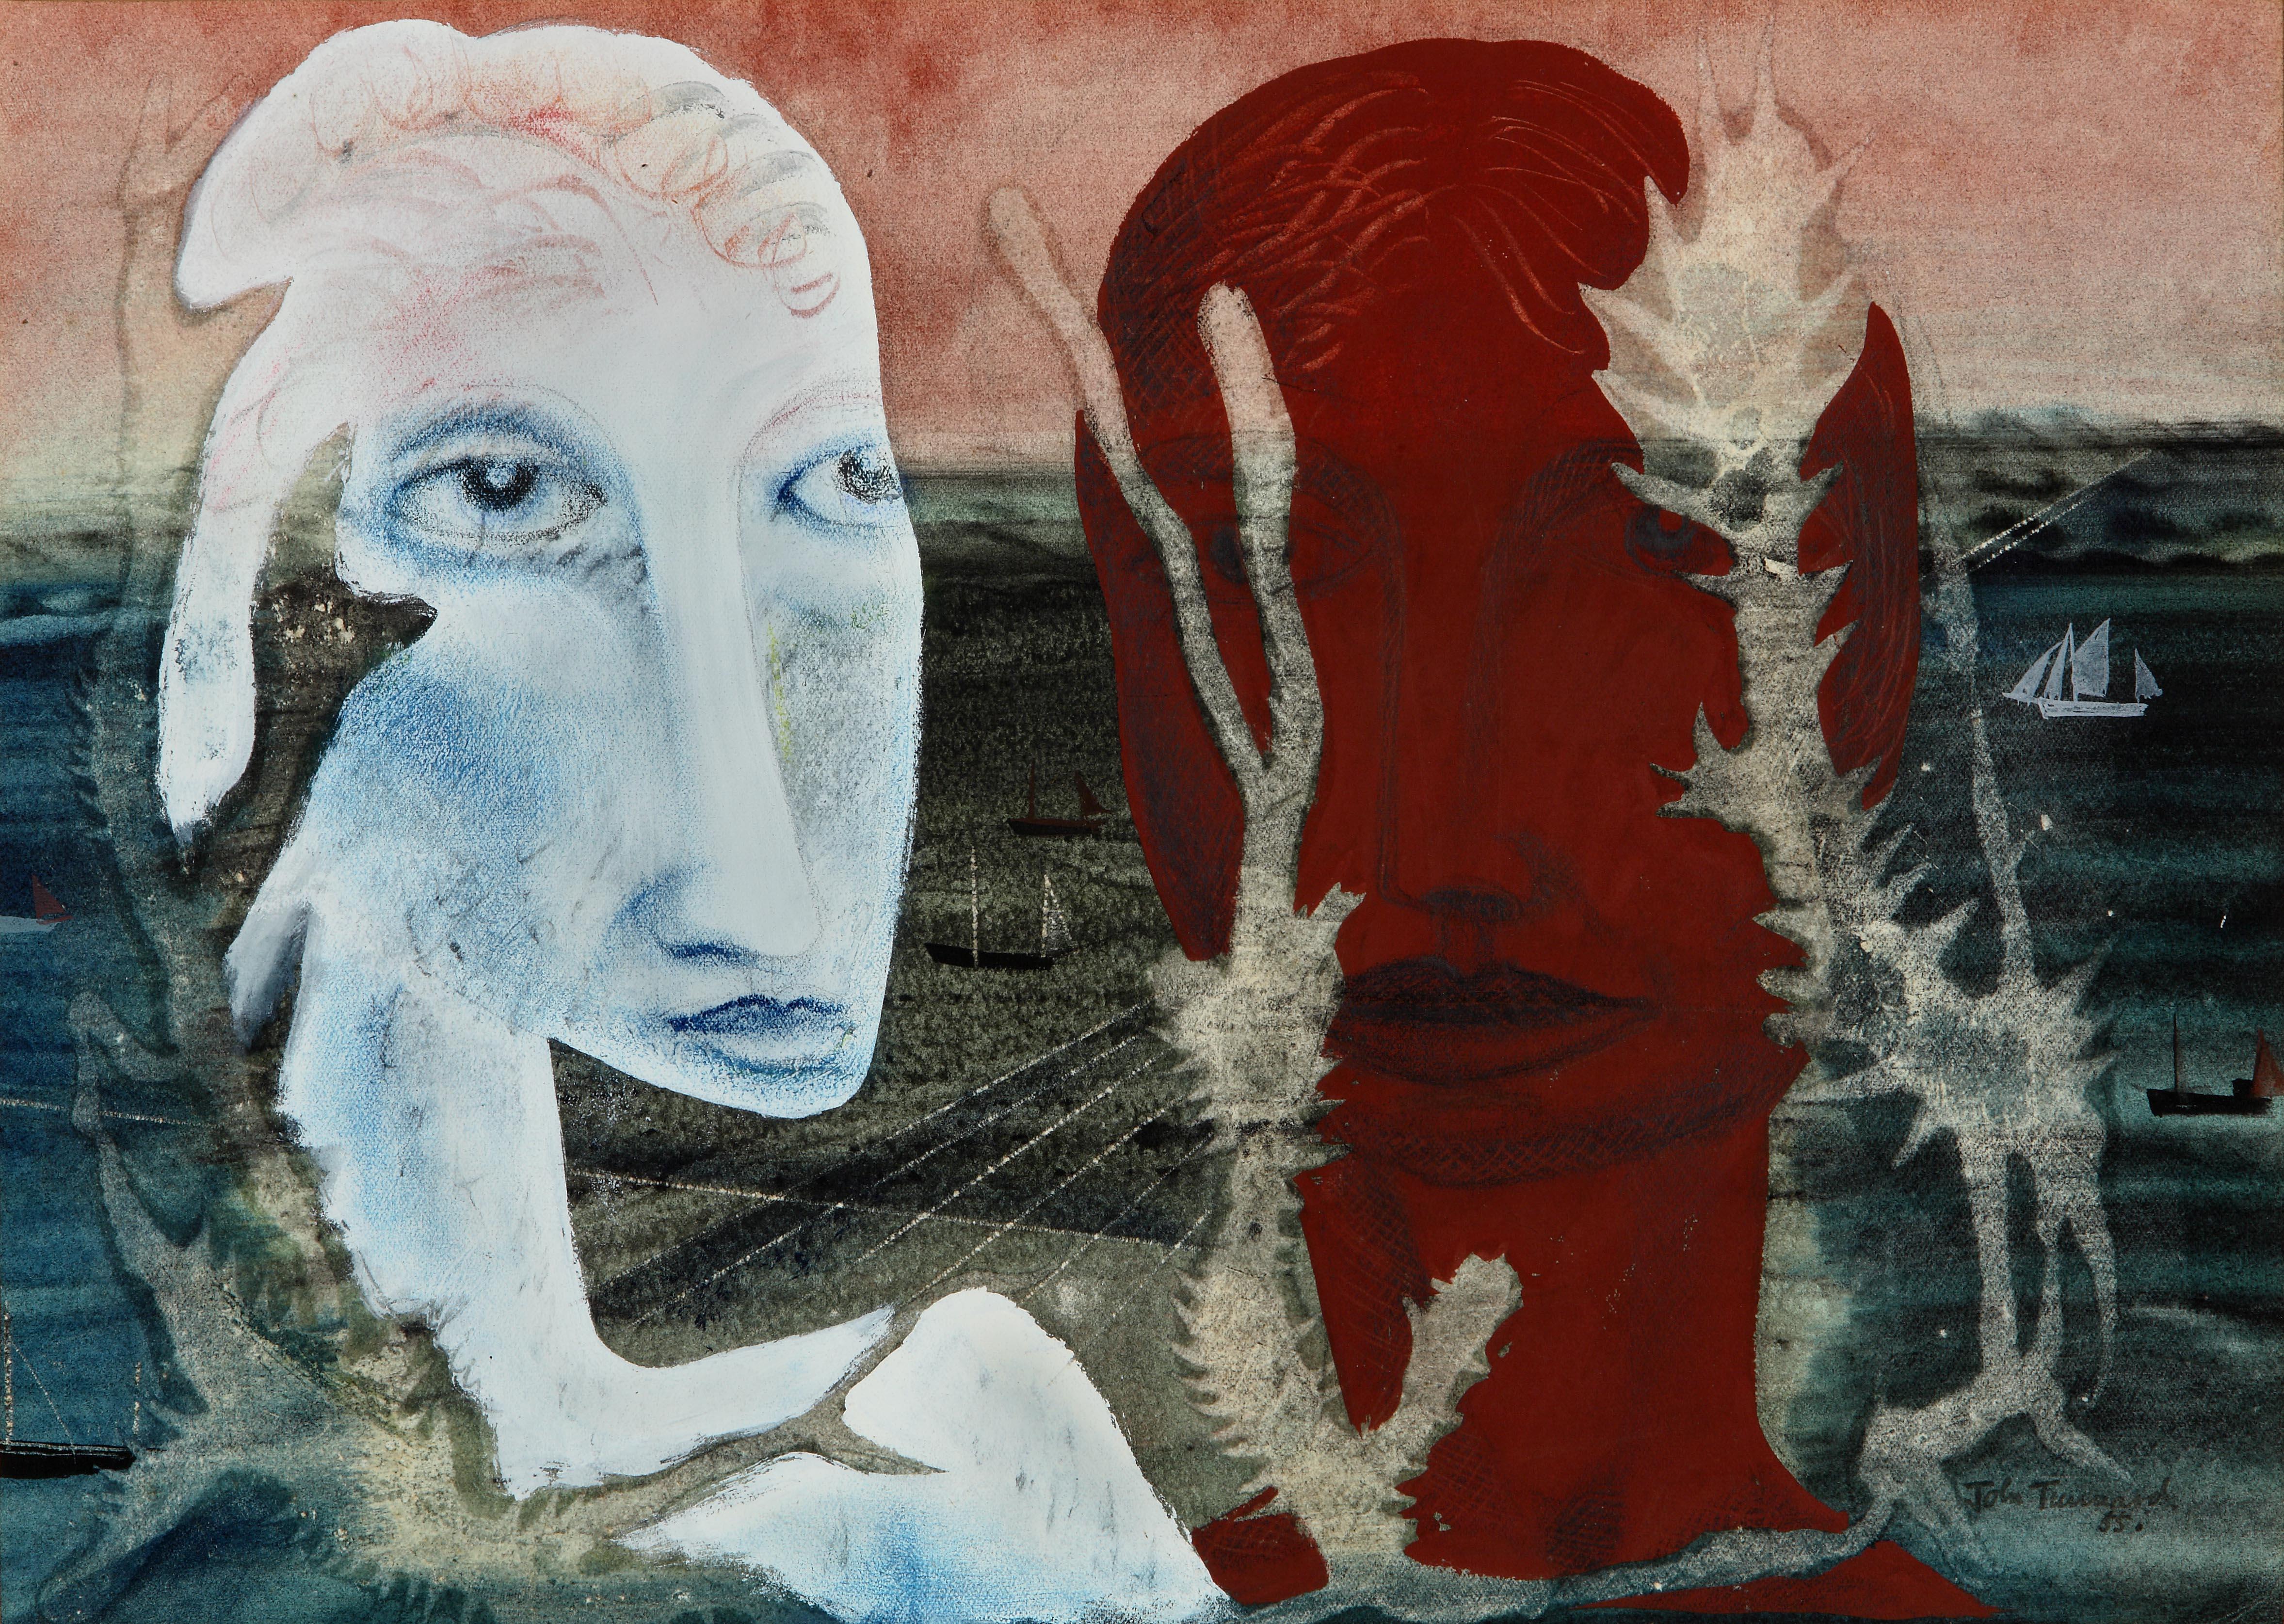 Paper John Tunnnard, Two Heads, Watercolor and Gouache, 1950s, Picture, Surrealism